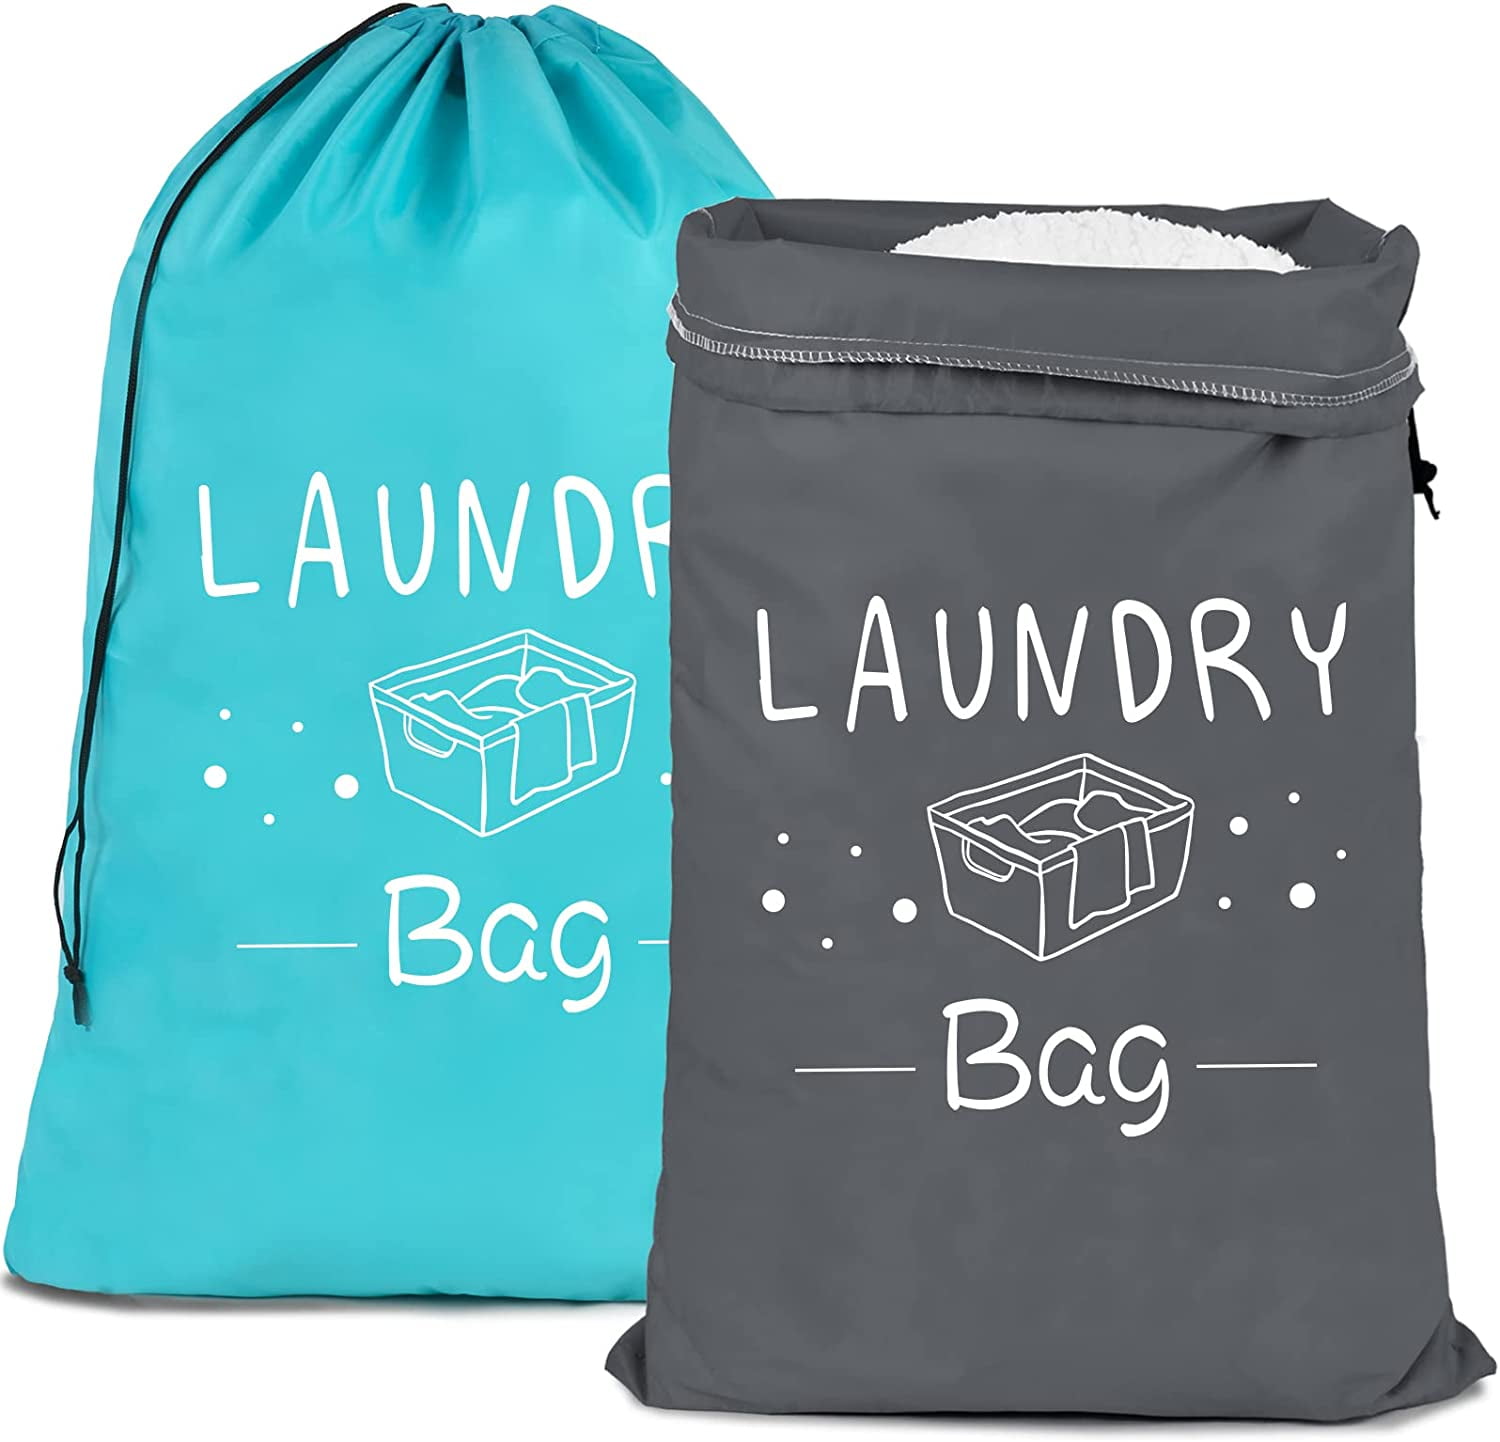 This Packable Travel Laundry Bag Will Keep Your Clean and Dirty